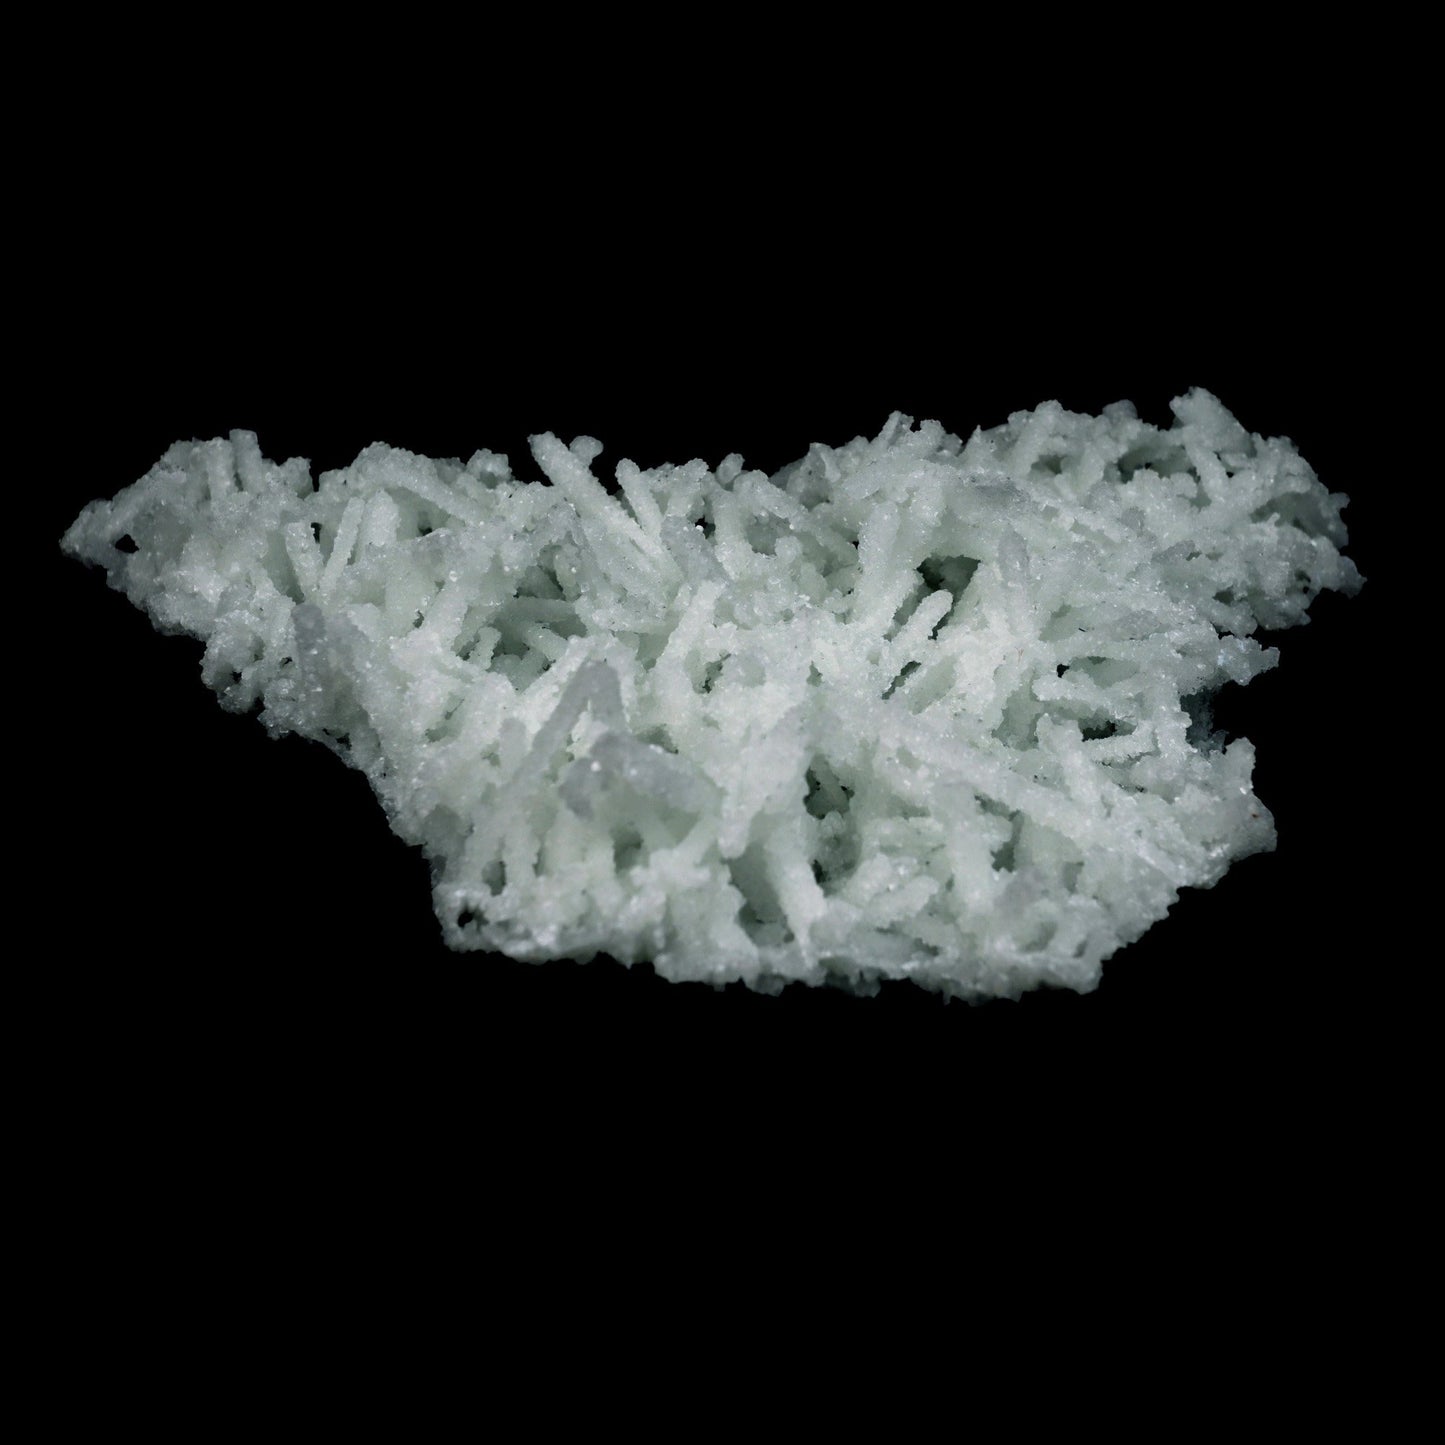 Prehnite Pseudomorphed Rare Find Natural Mineral Specimen # B 4714  https://www.superbminerals.us/products/prehnite-pseudomorphed-rare-find-natural-mineral-specimen-b-4714  Features: Pretty mint-green prehnite has pseudomorphed elongated laumontite crystals on this classic and excellent large jackstraw cluster from the famous Malad Quarry. The translucent pseudos and some of them are hollow on this impressive sculptural 360-degree specimen. Seldom on the market today